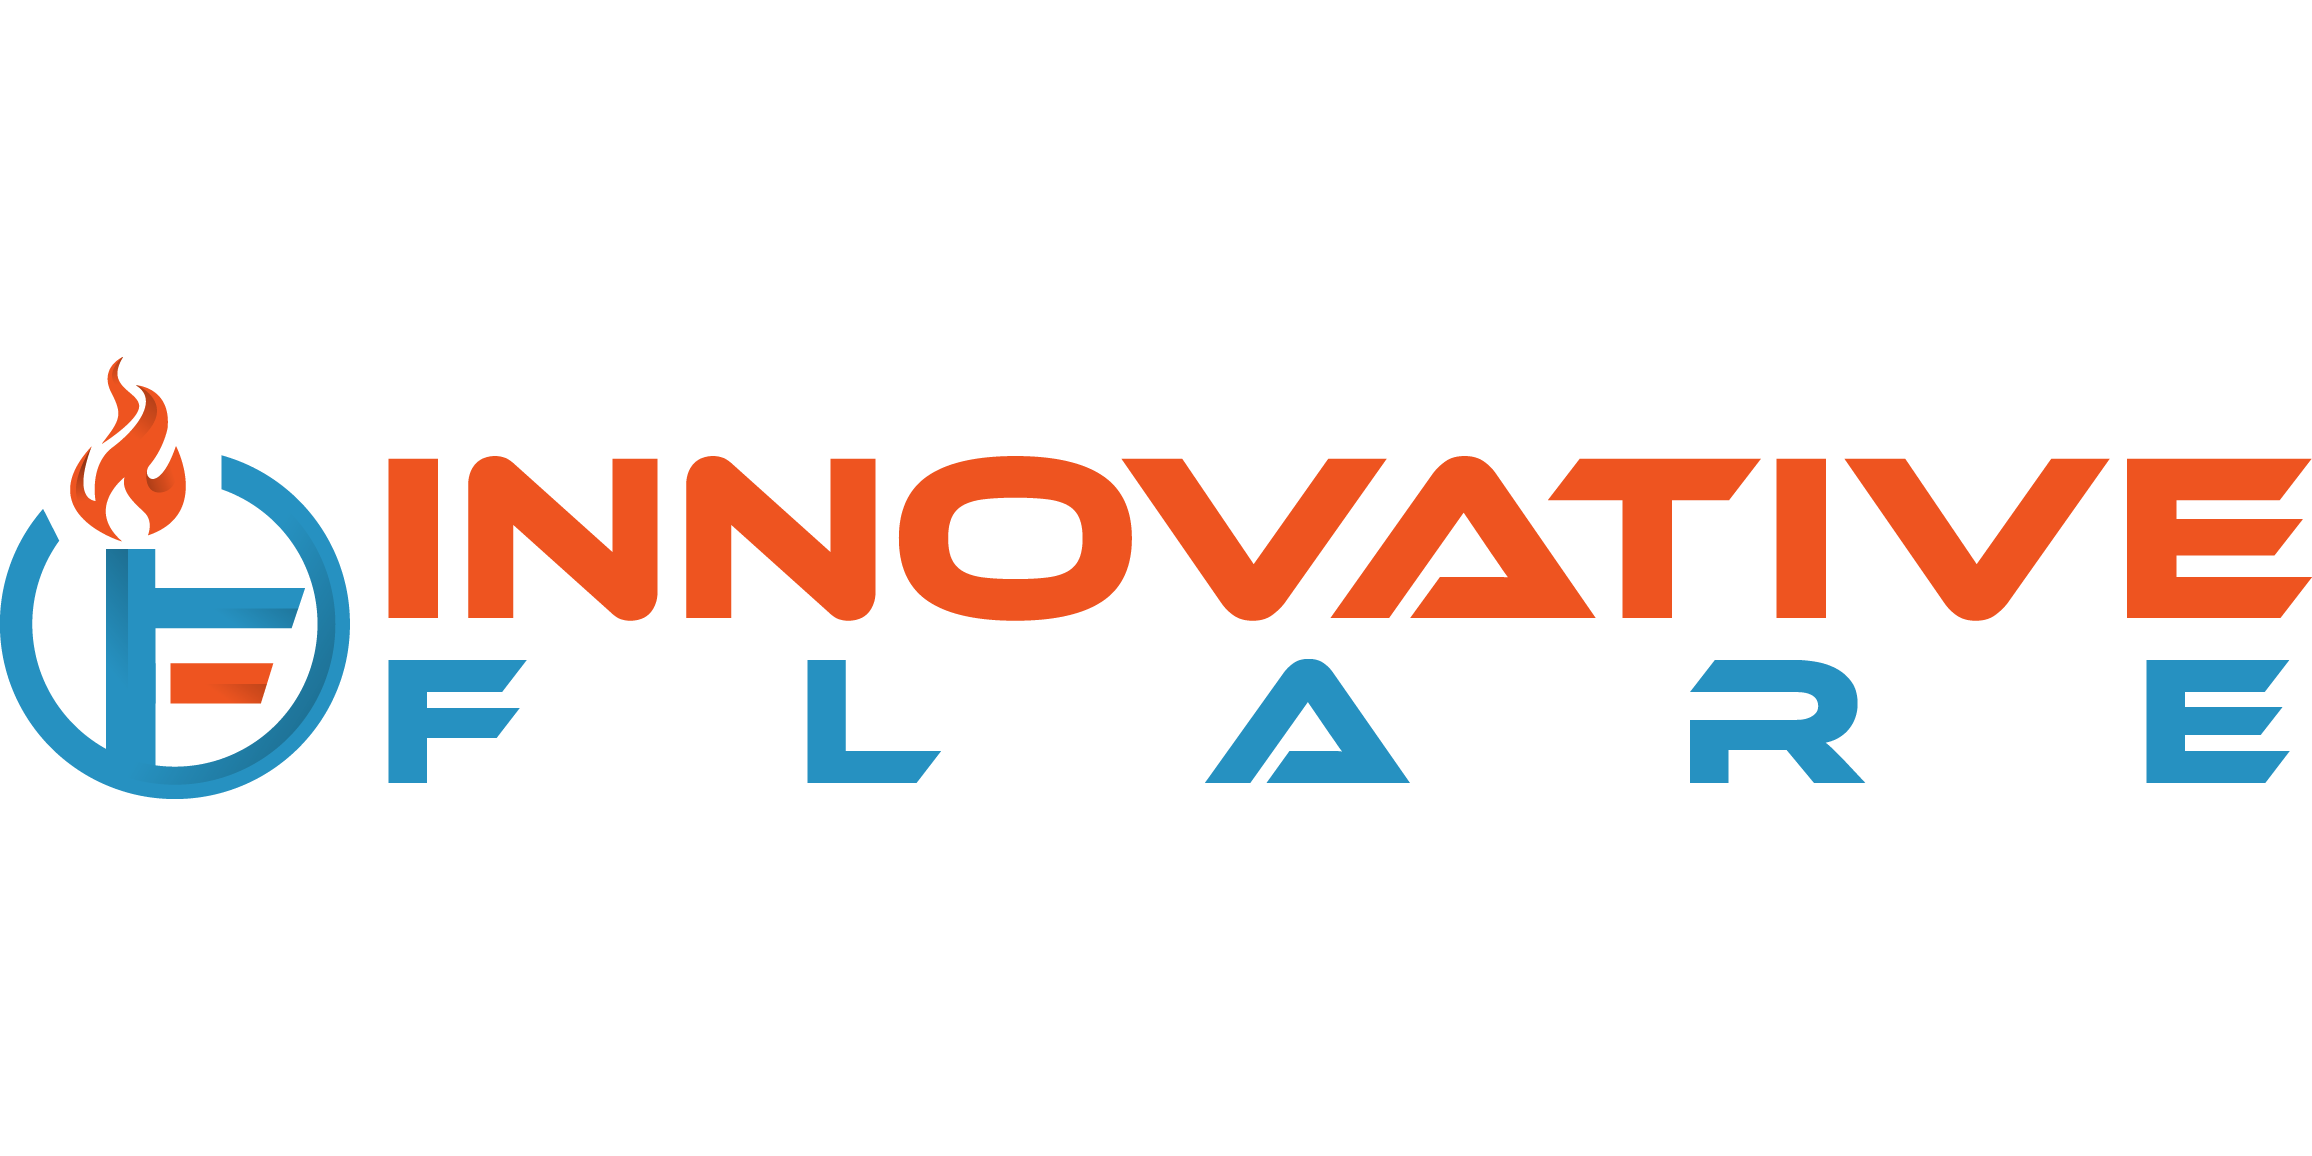 Innovative Flare review